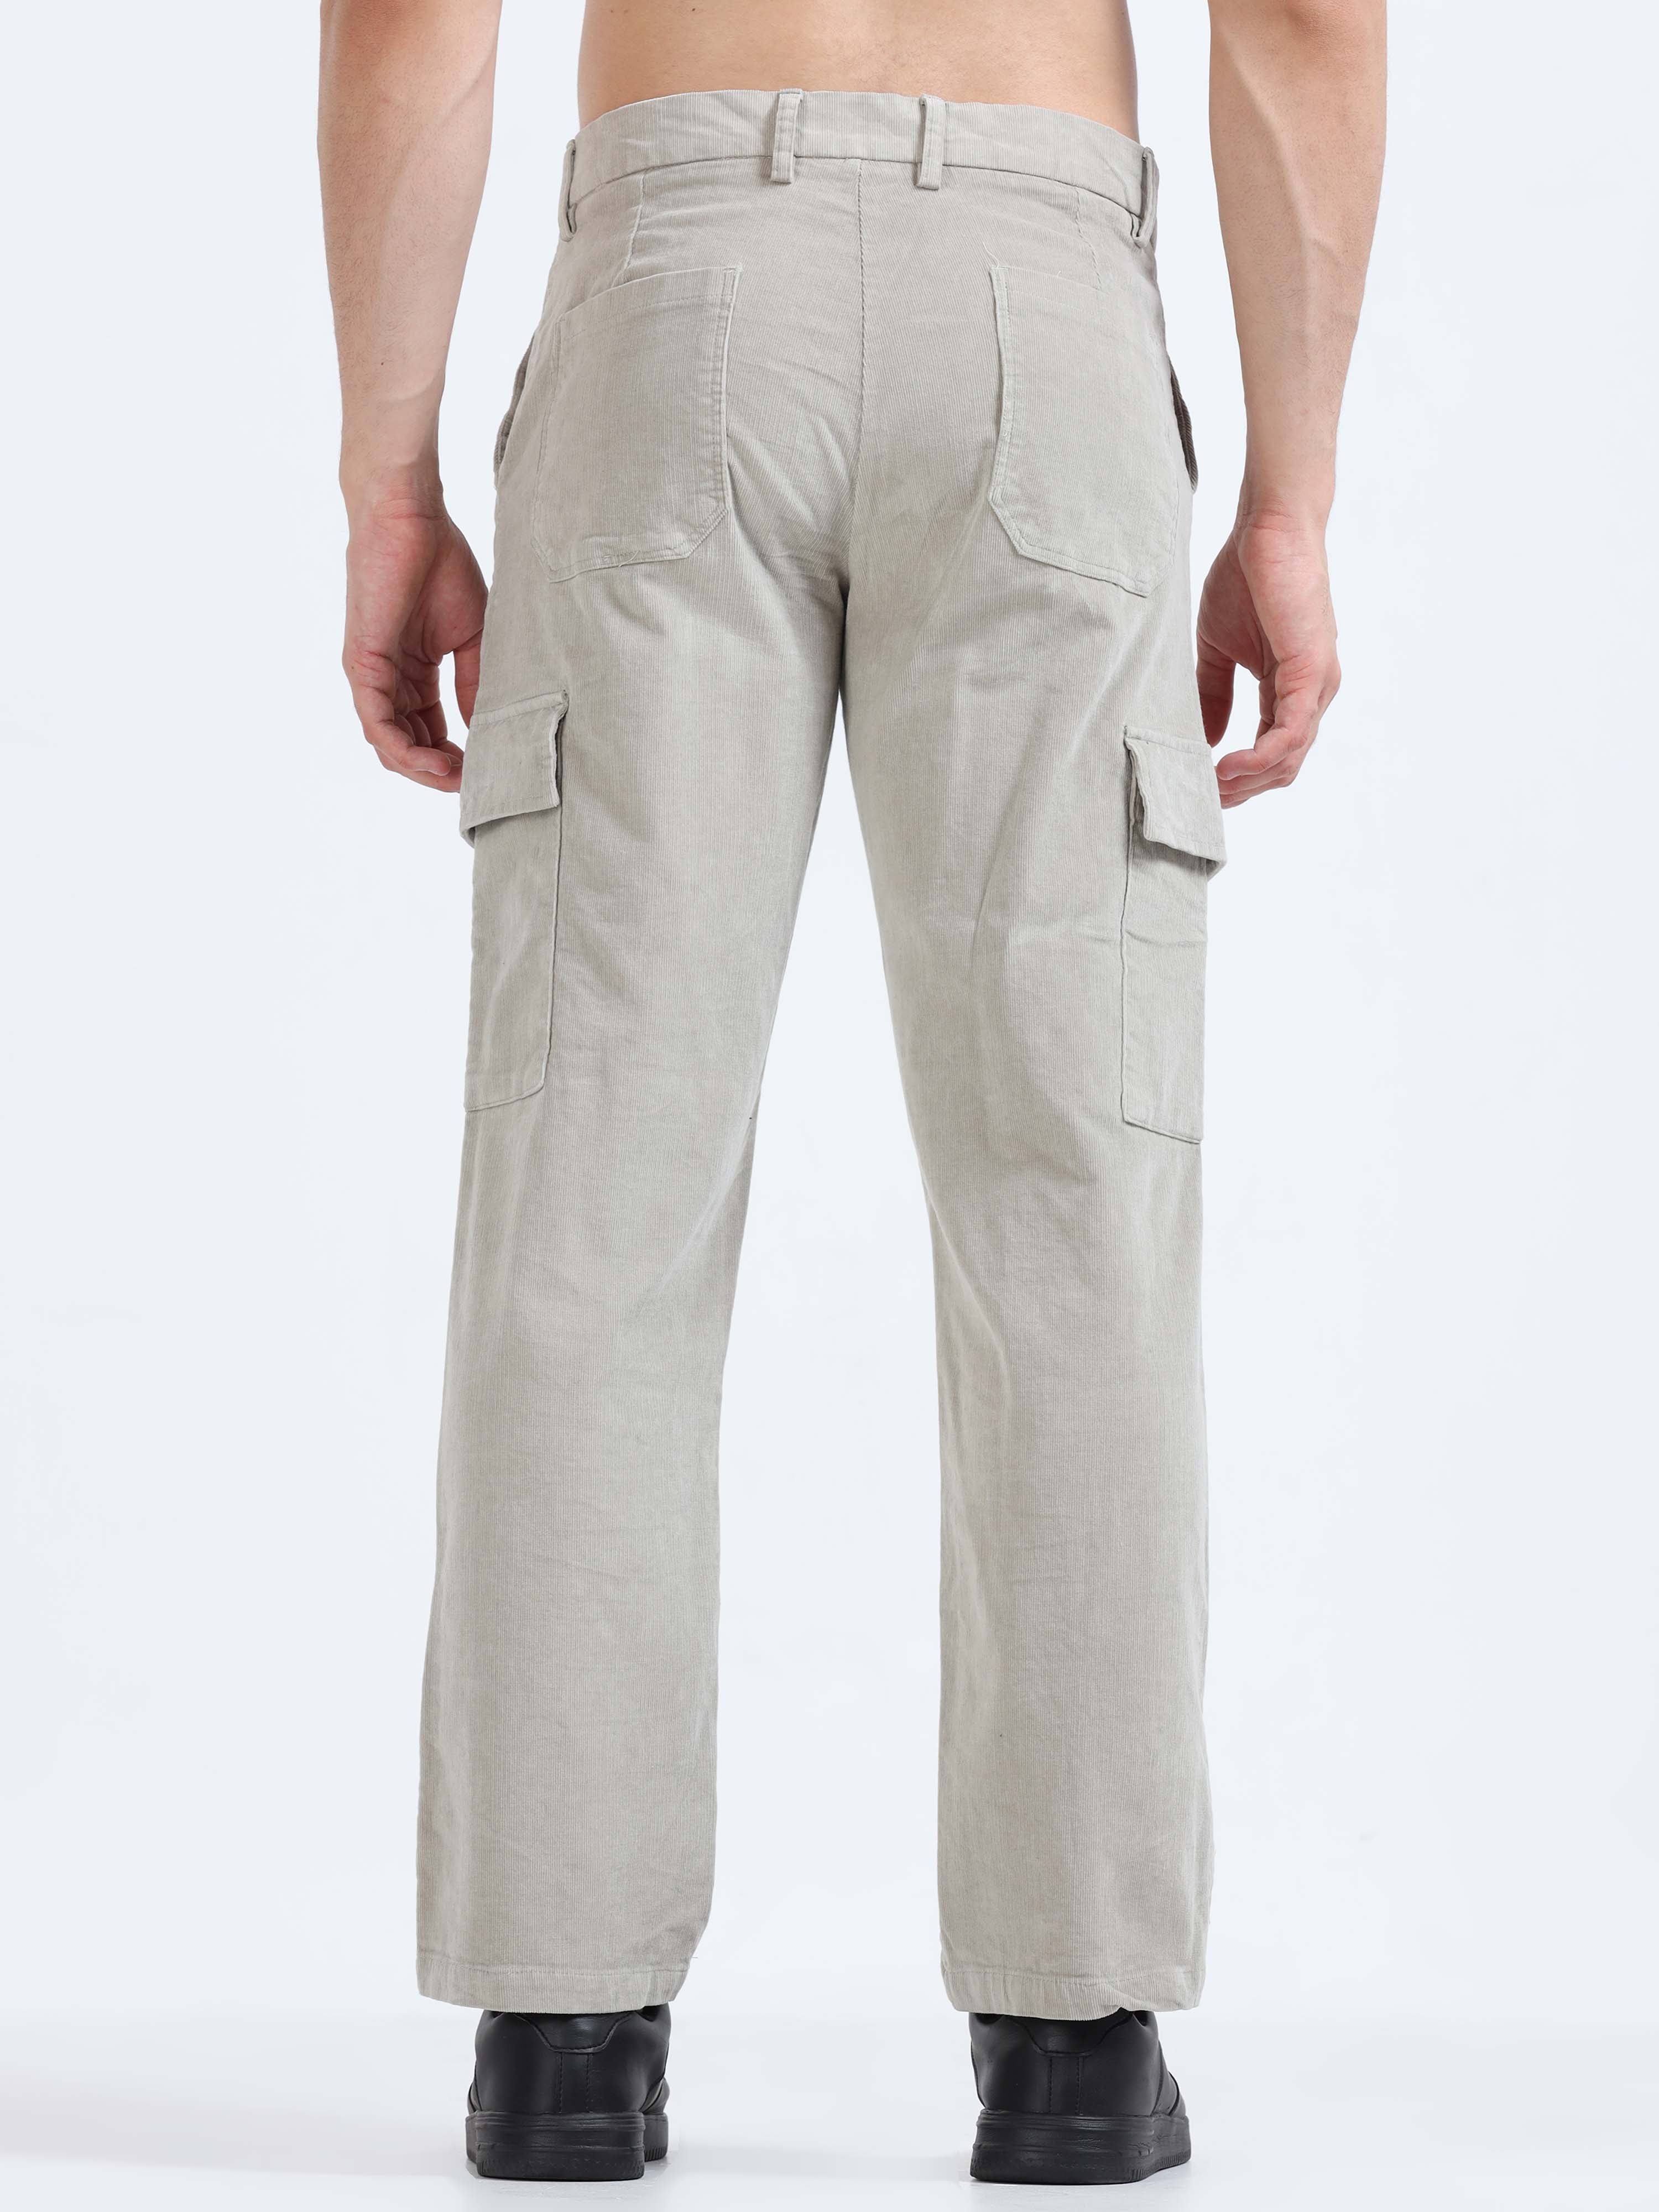 Soft Corduroy Light Grey Relaxed Cargo Pant